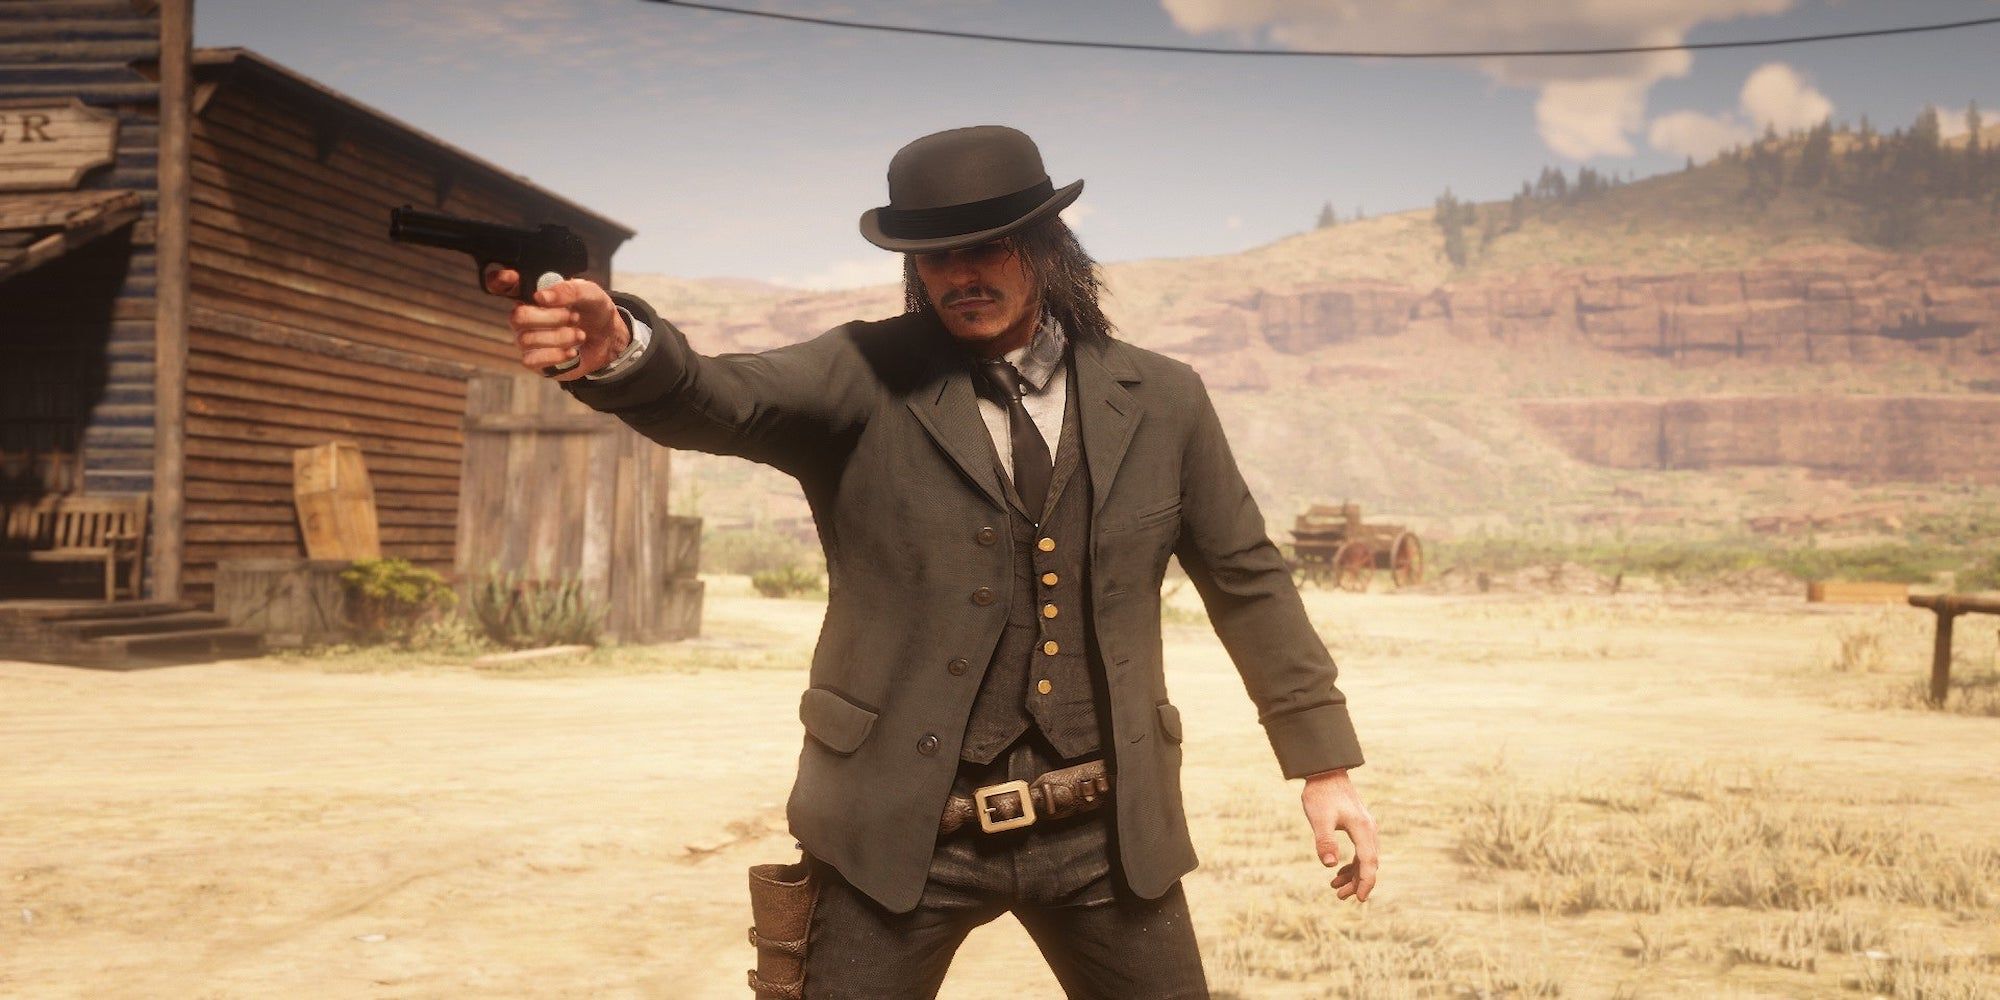 Atlantic lysere skør Red Dead Redemption Outfit Guide: How To Unlock Each Costume